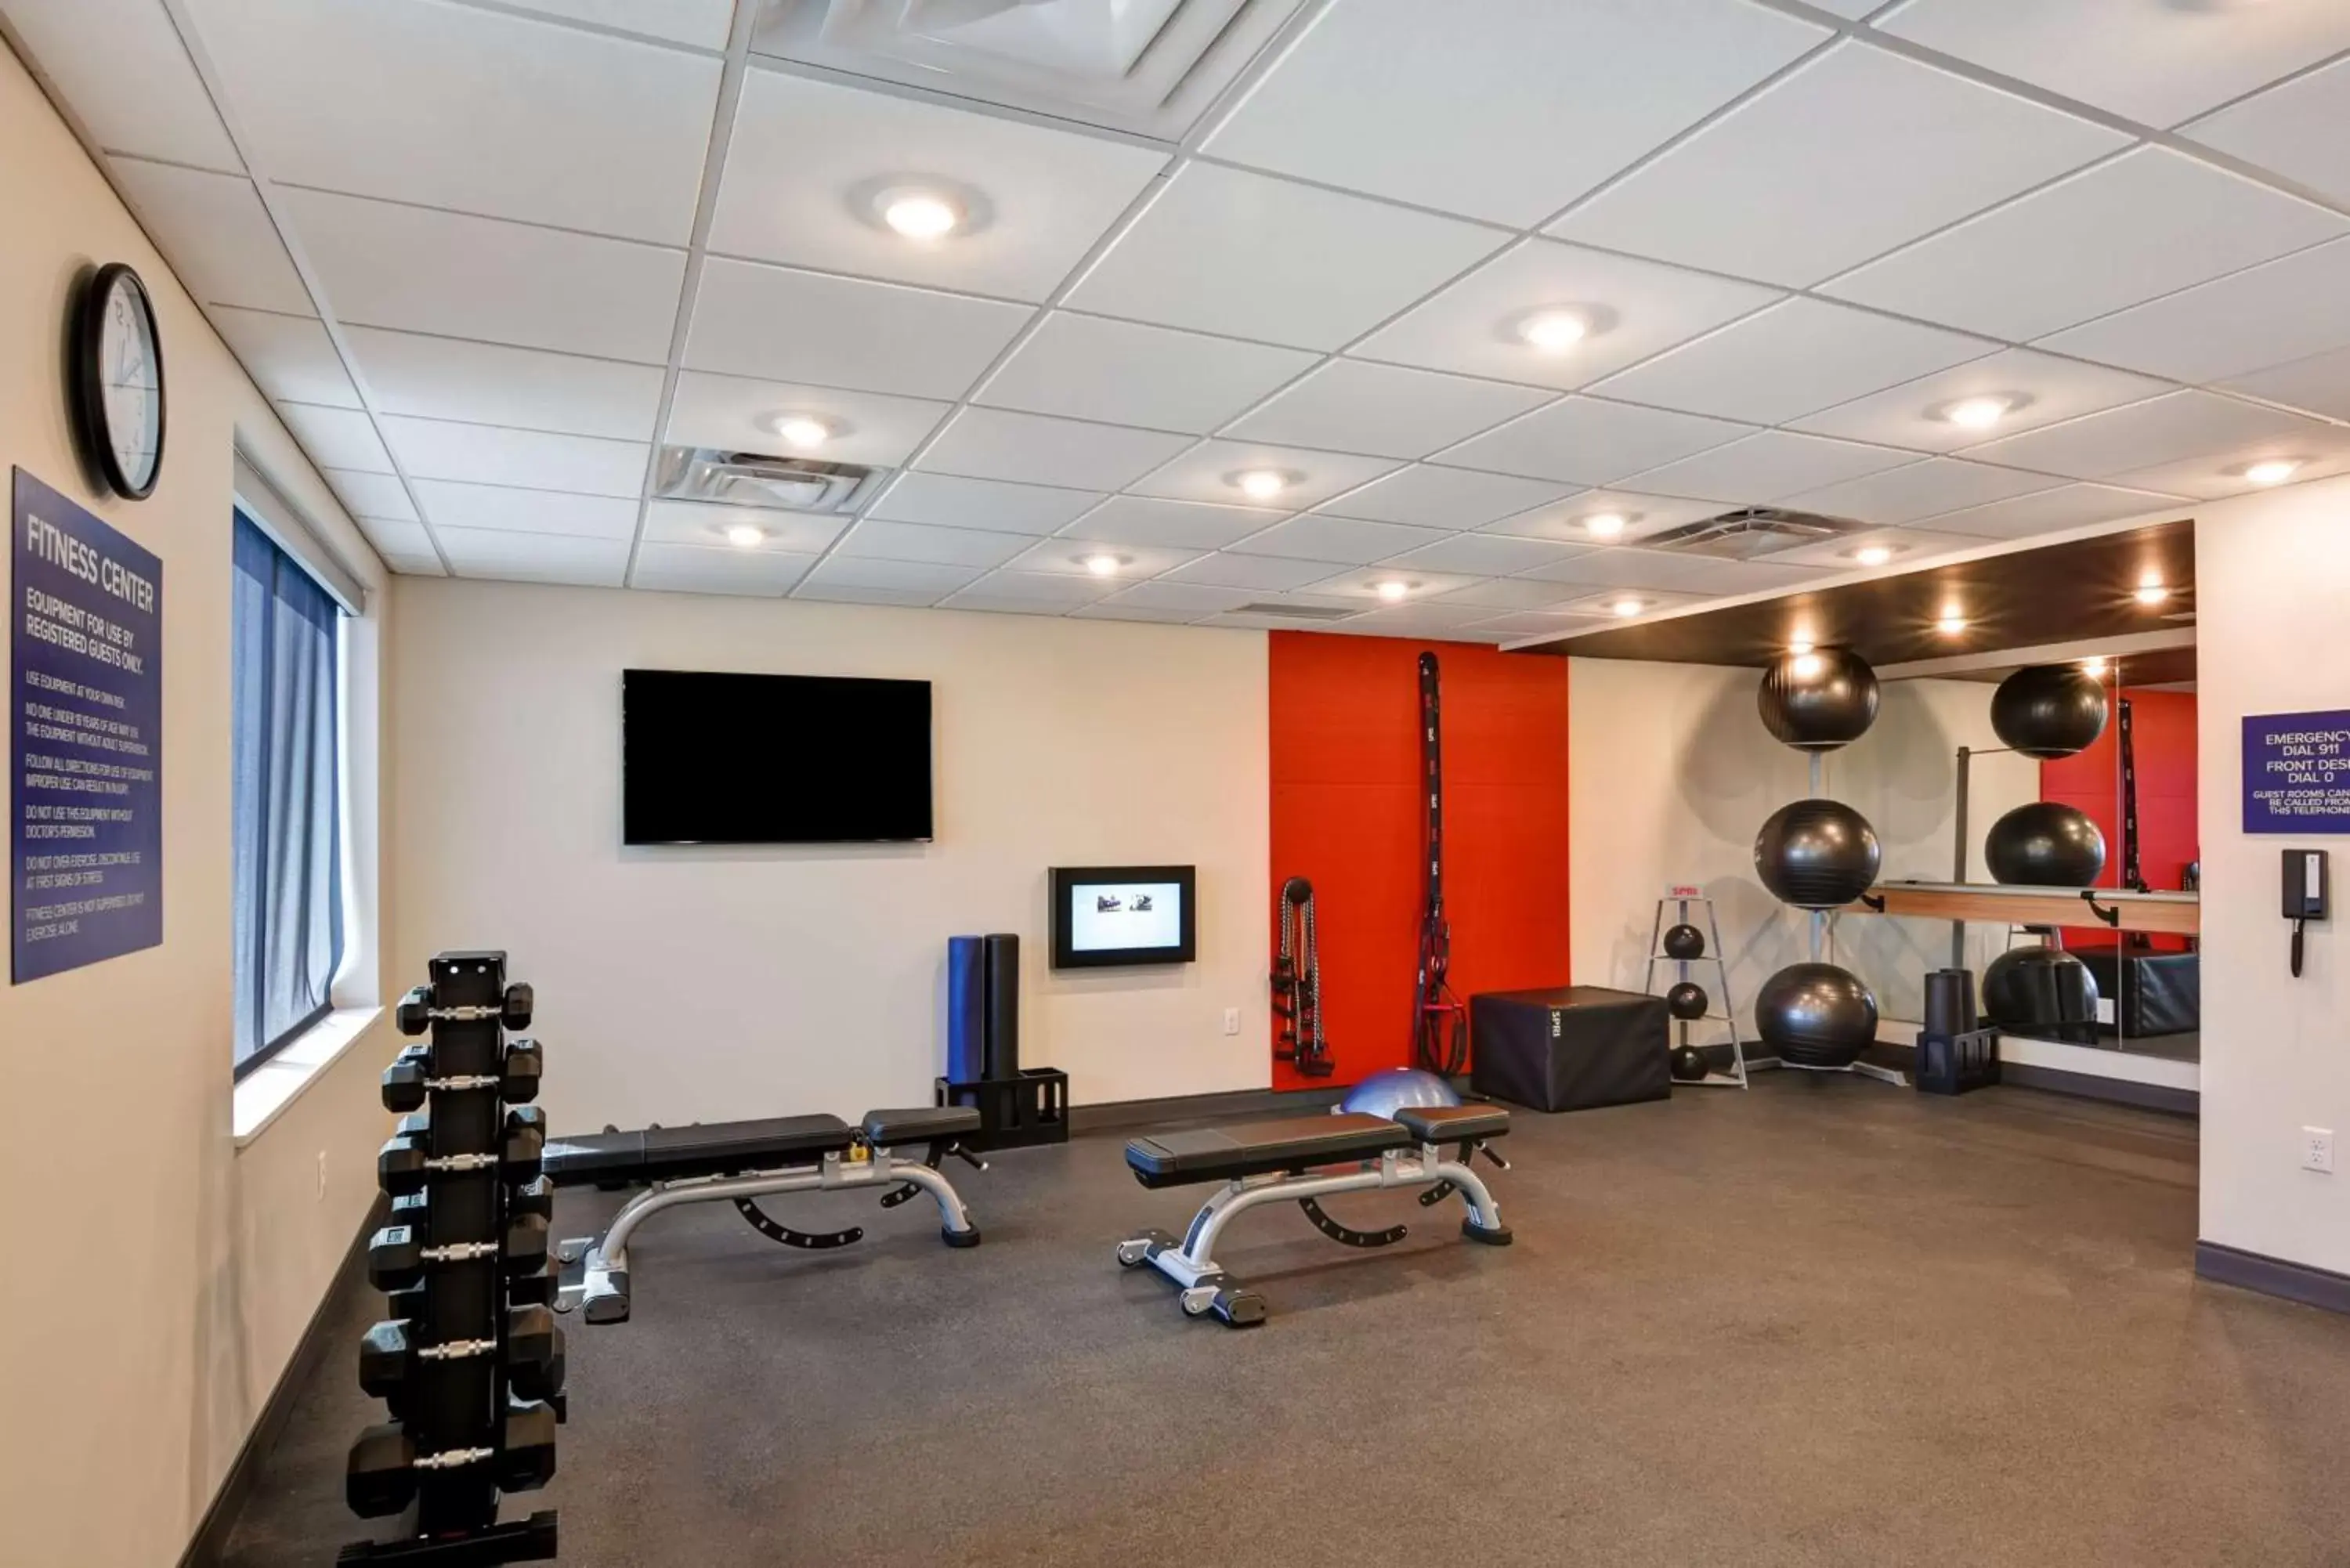 Fitness centre/facilities, Fitness Center/Facilities in Tru by Hilton Syracuse North Airport Area